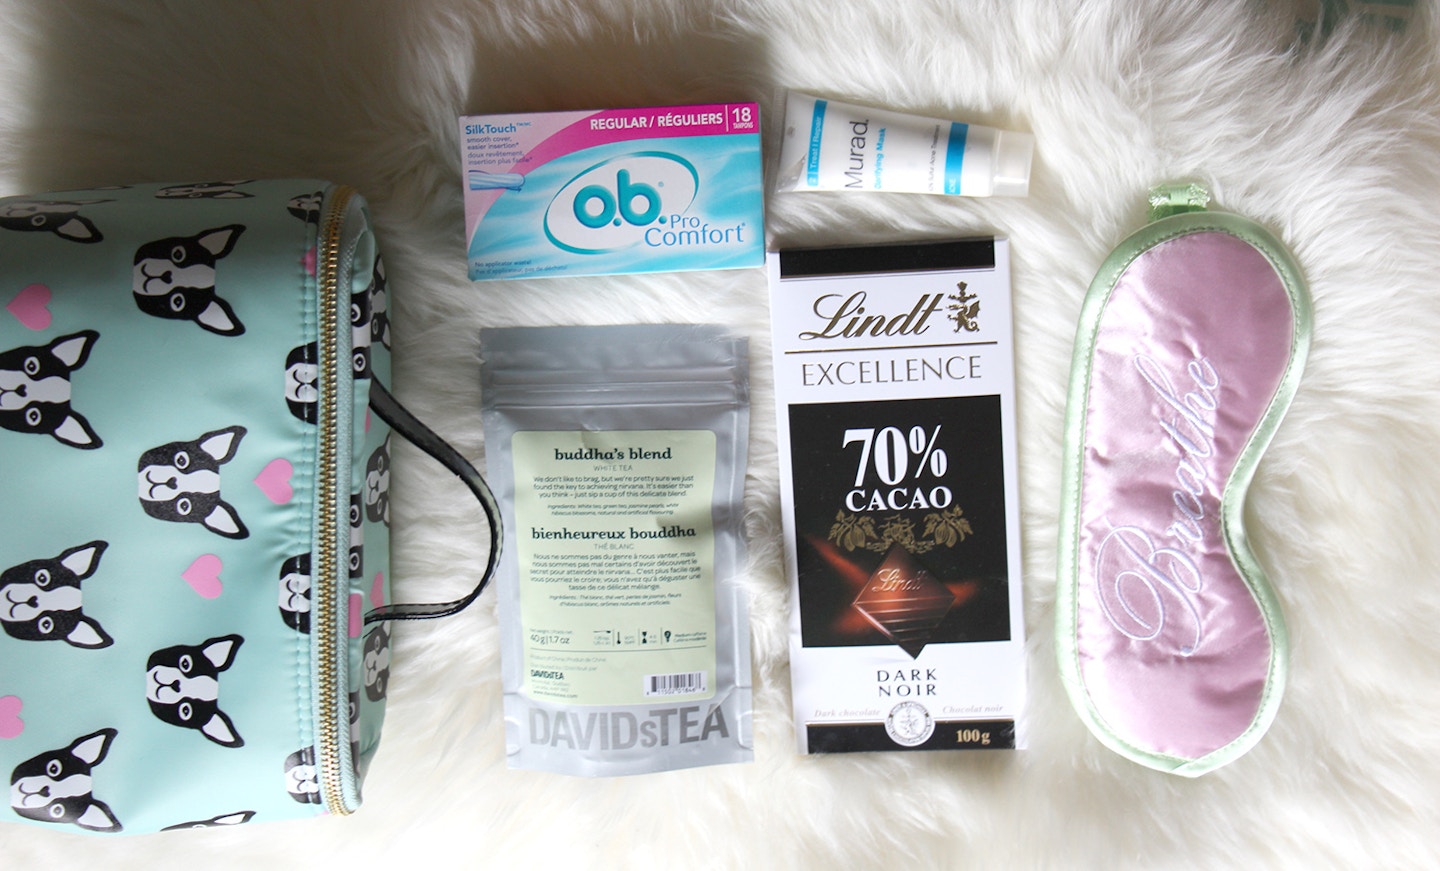 pms relief ob tampons giveaway